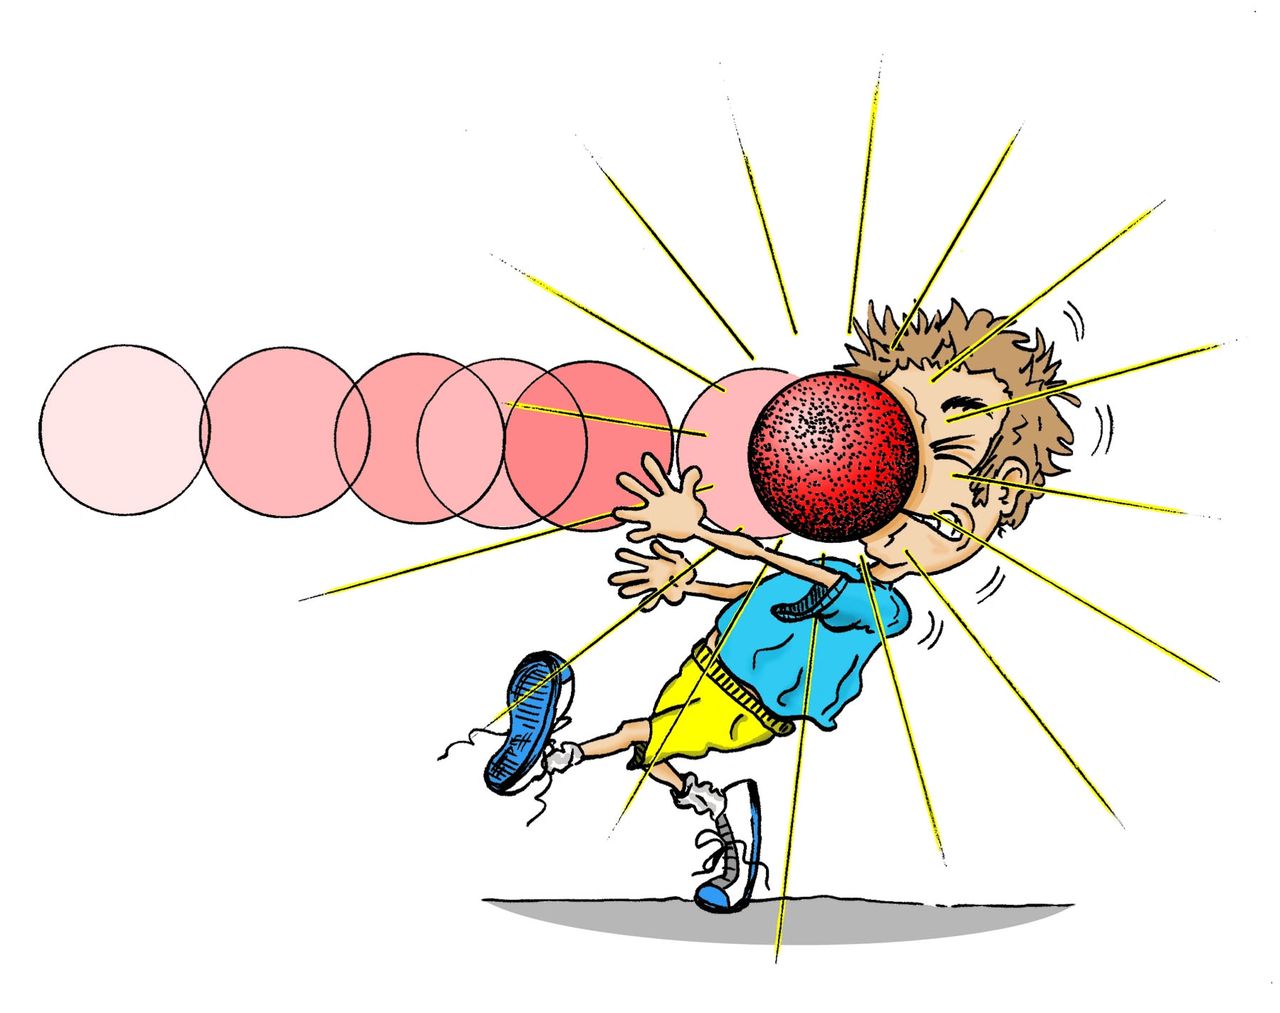 Monster Ball: A super fun Throwing Game for PE Class